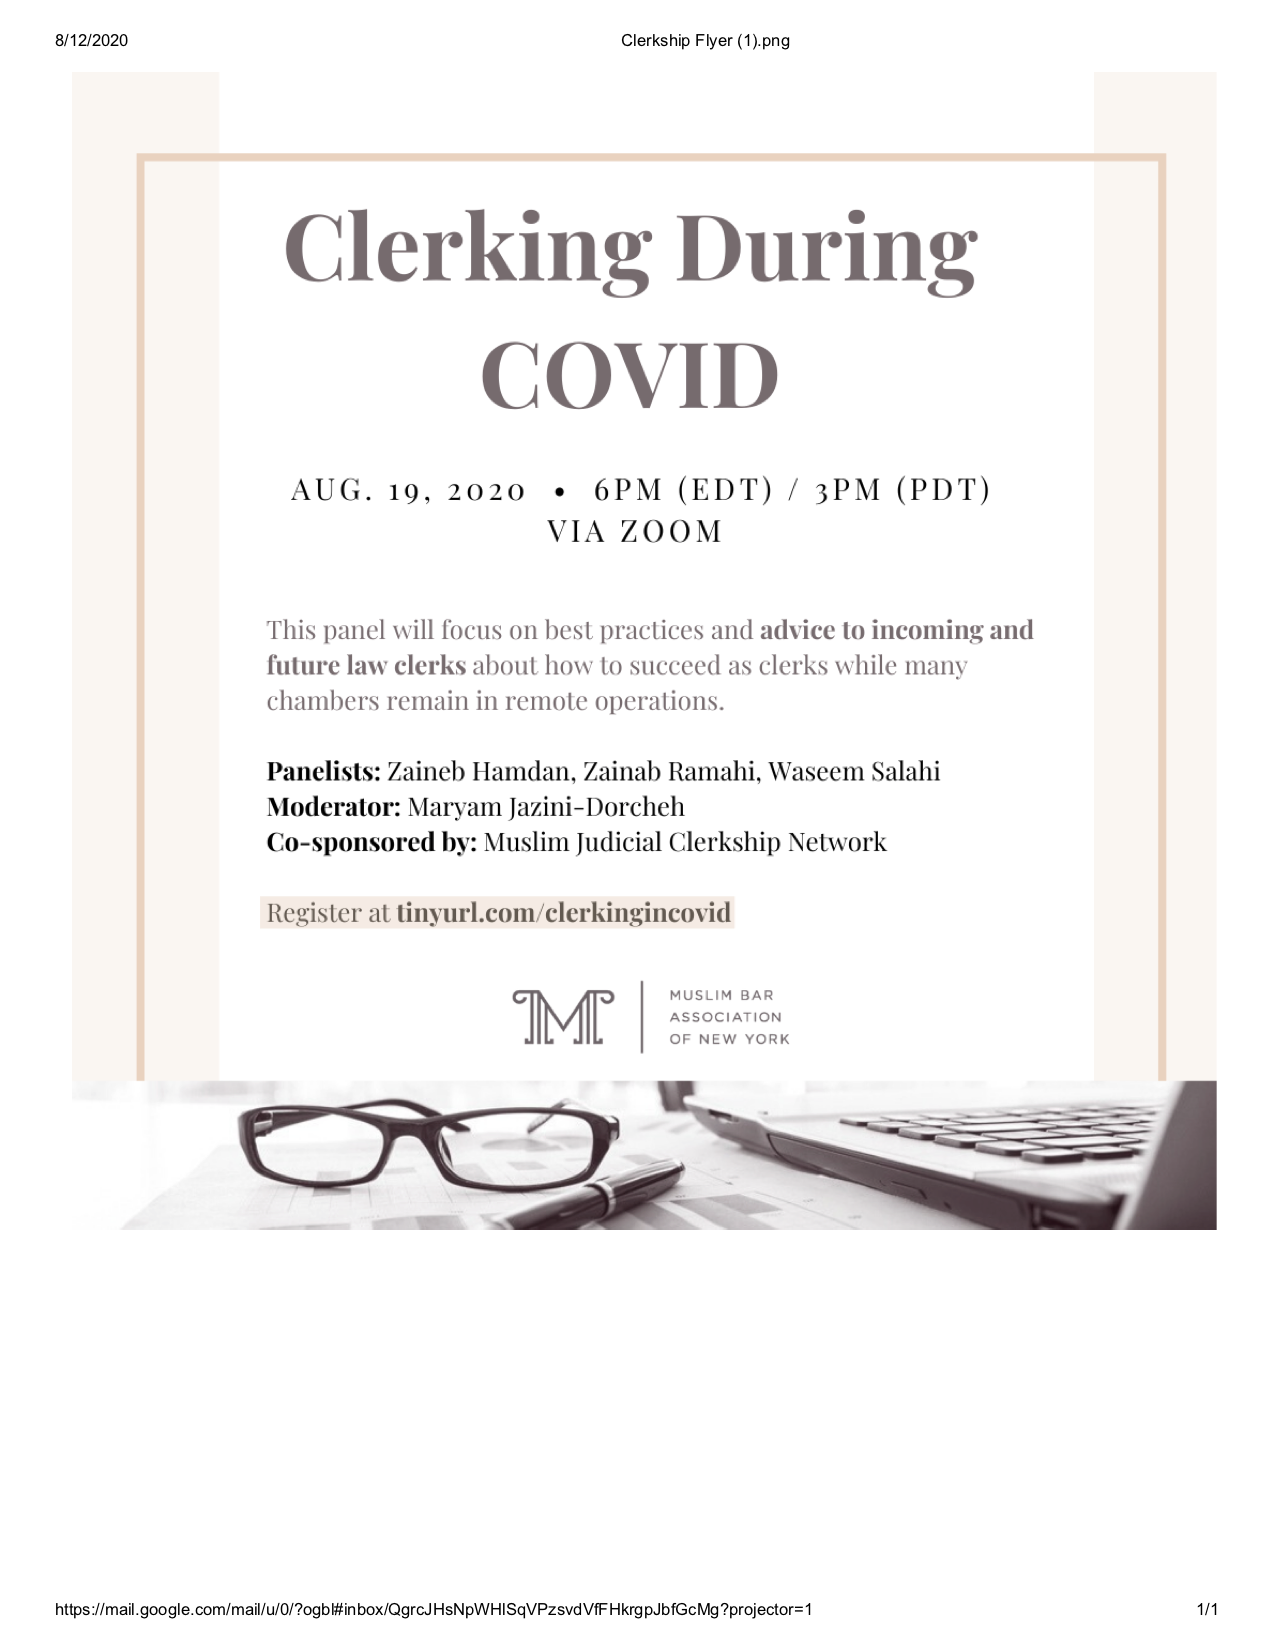 clerking during covid flyer 8.12.20 0